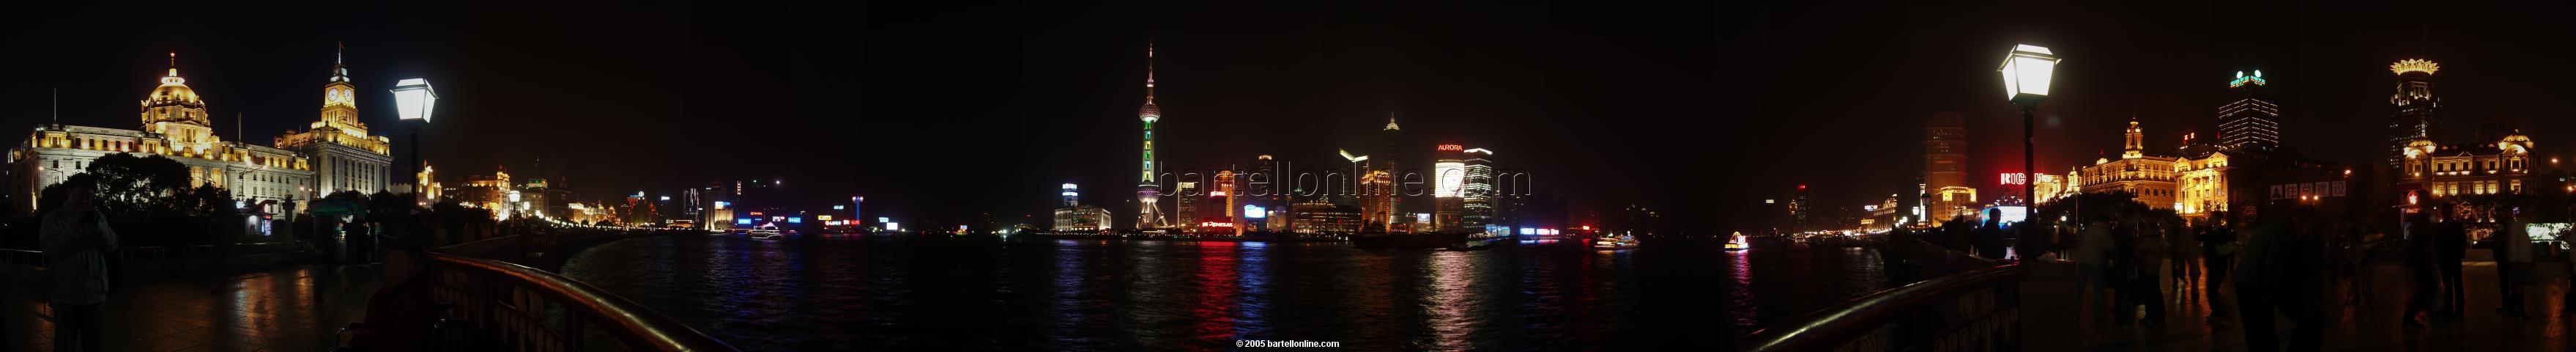 Night panorama of Huangpu river and Pudong seen from The Bund in Shanghai, China